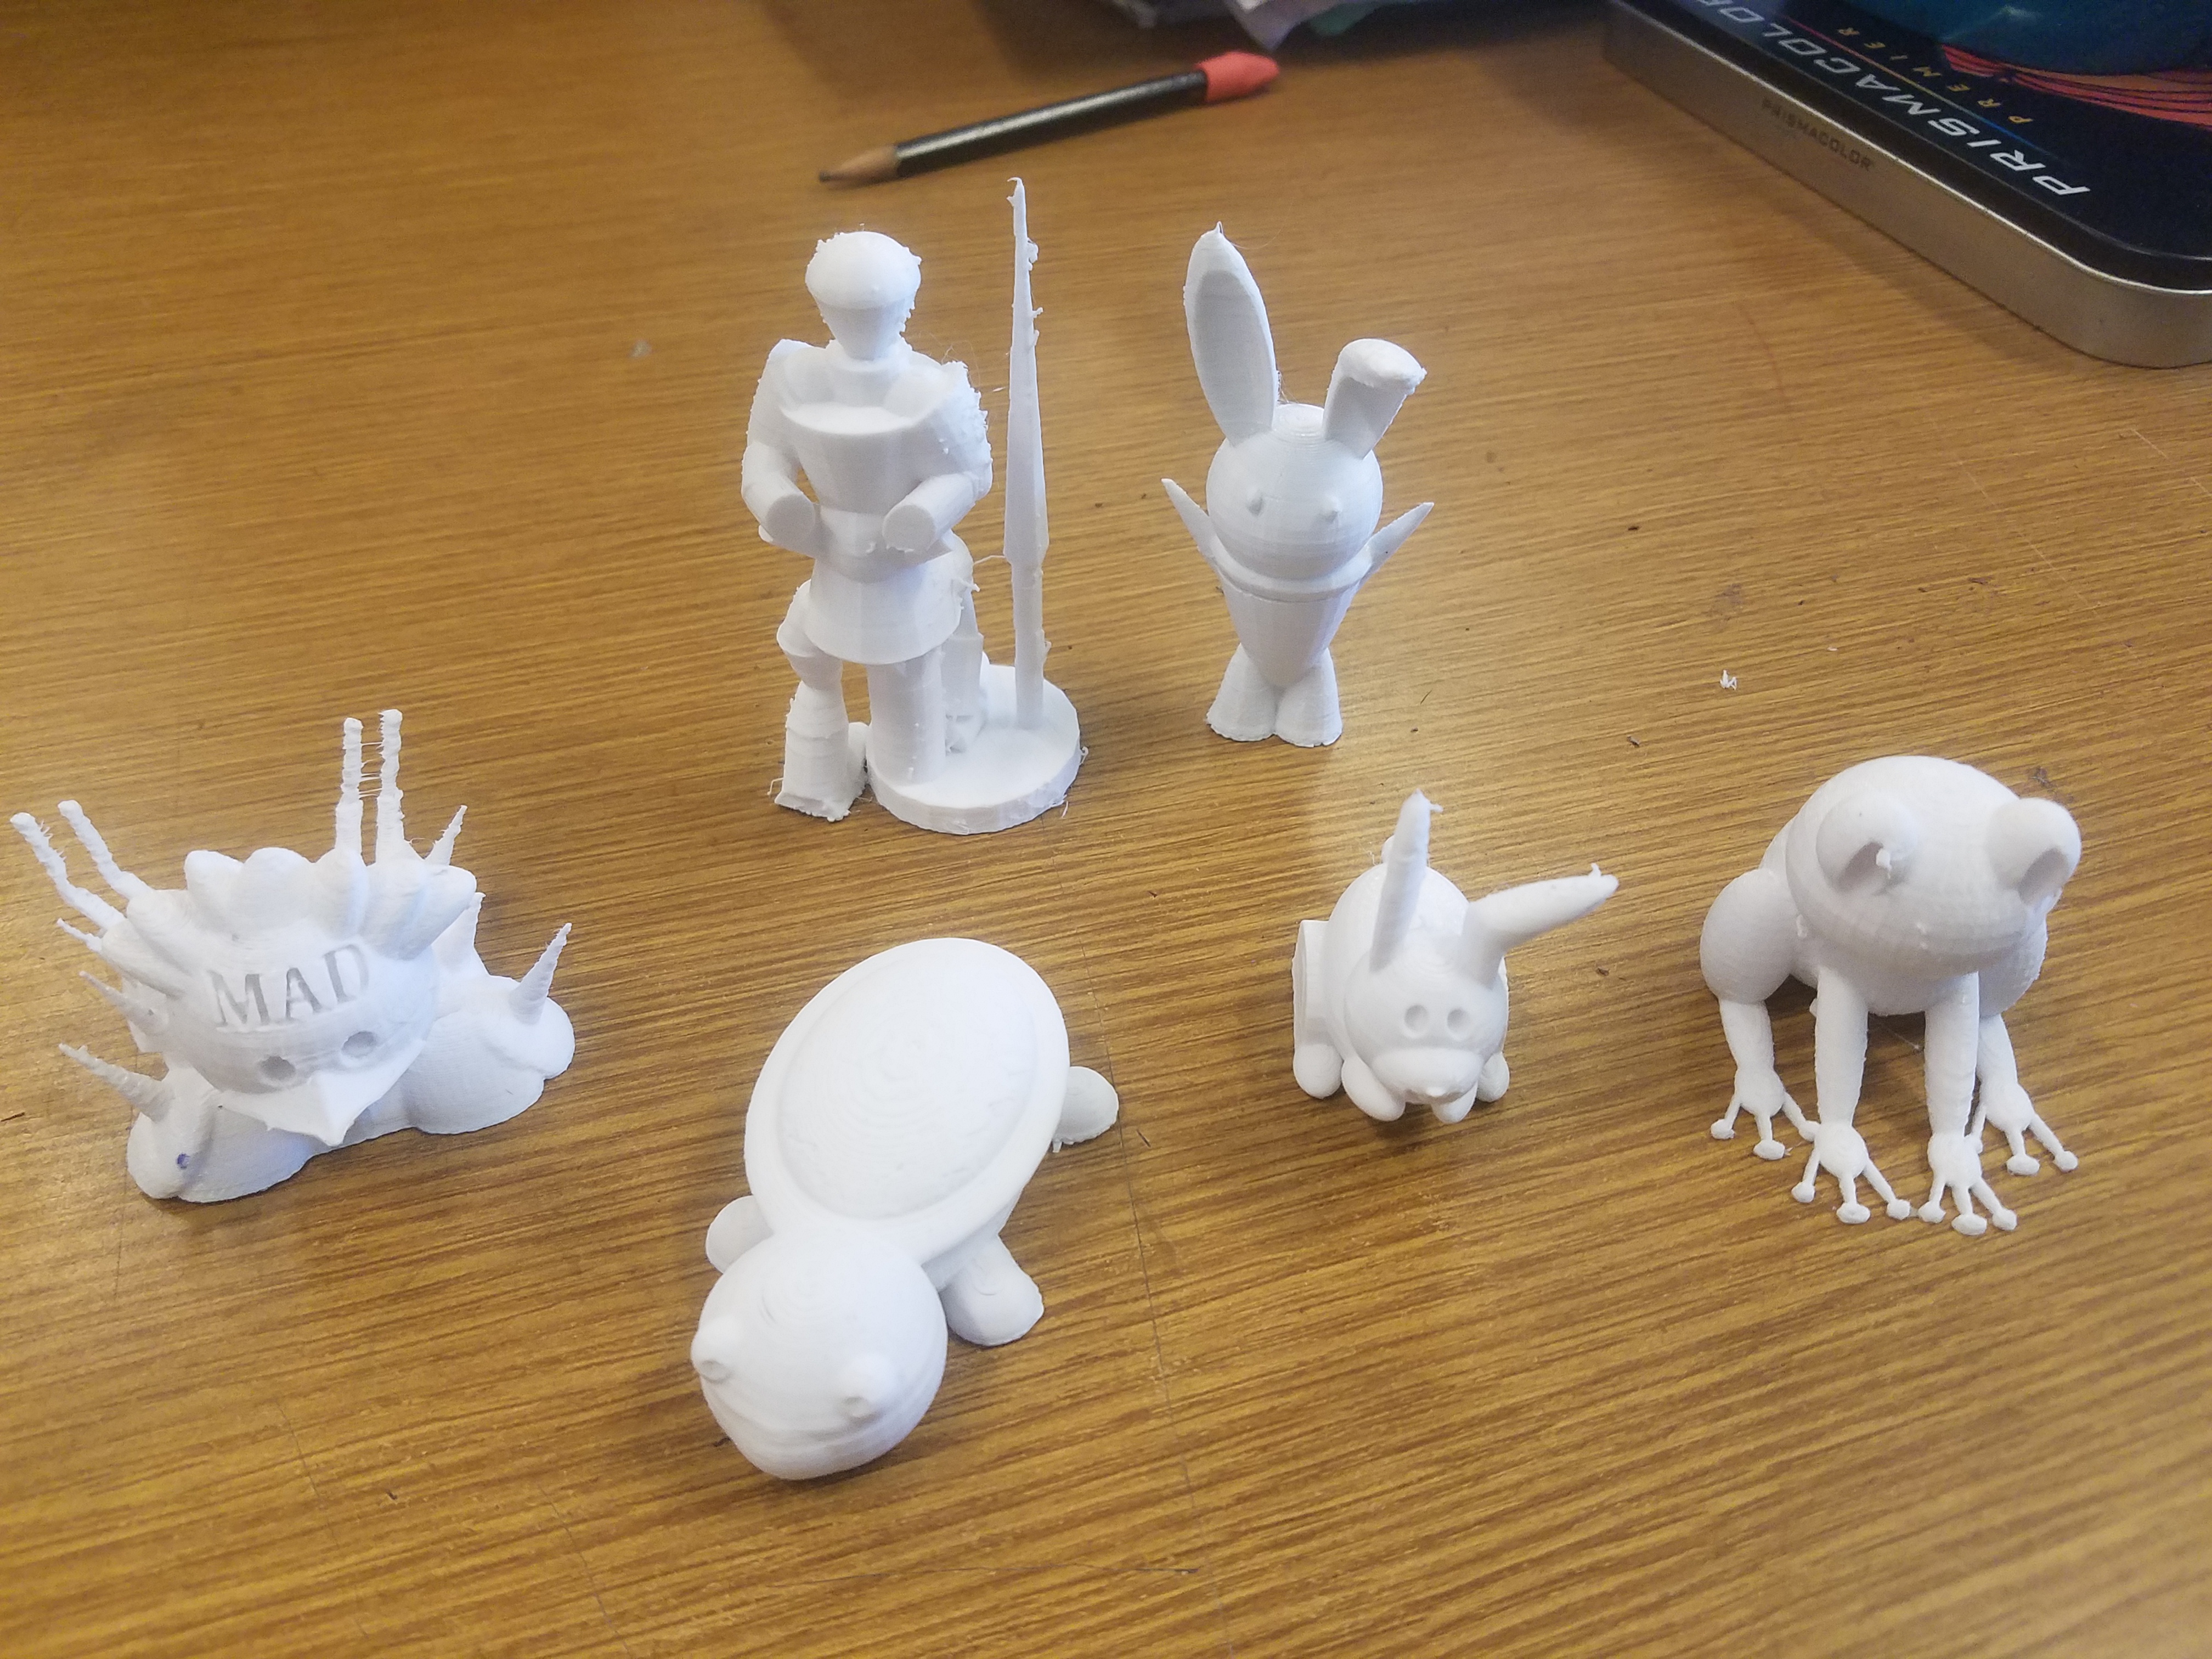 RMS Art Classses are 3D Printing